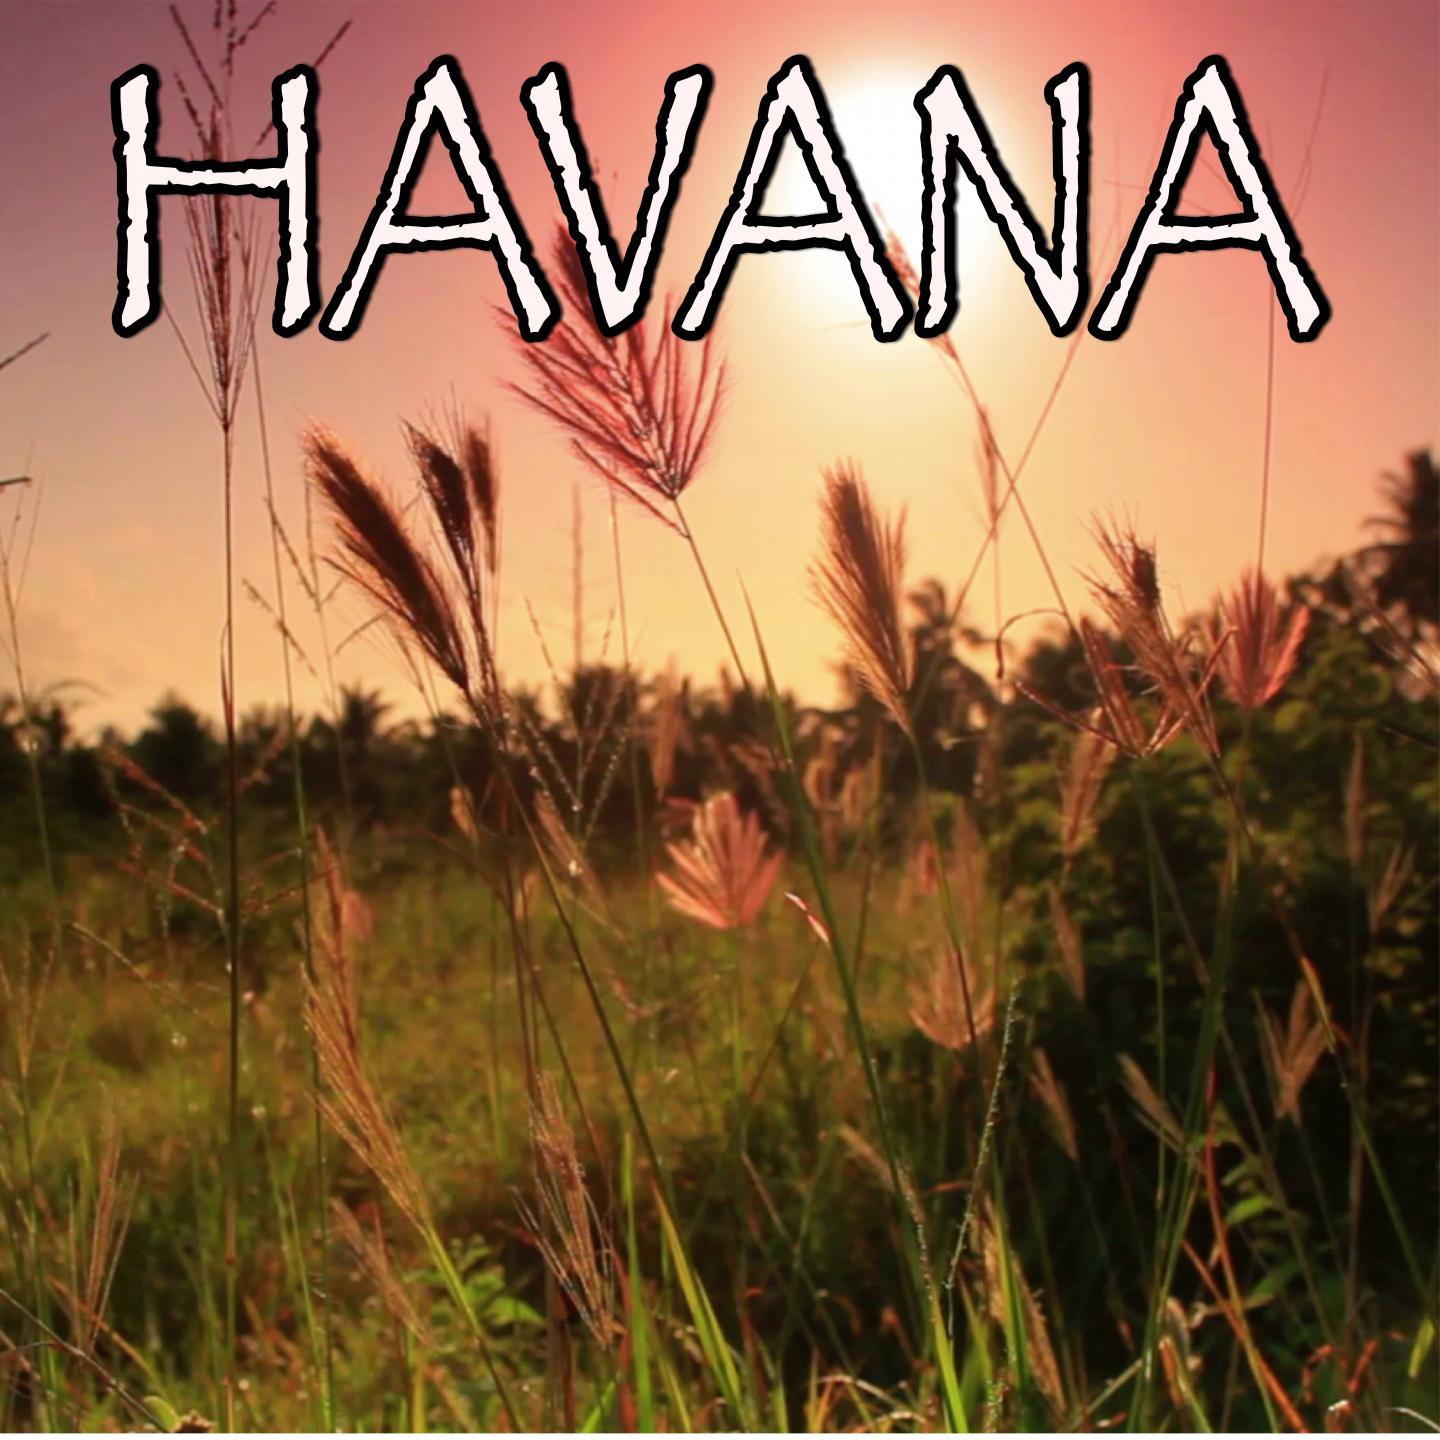 Havana - Tribute to Camila Cabello and Young Thug